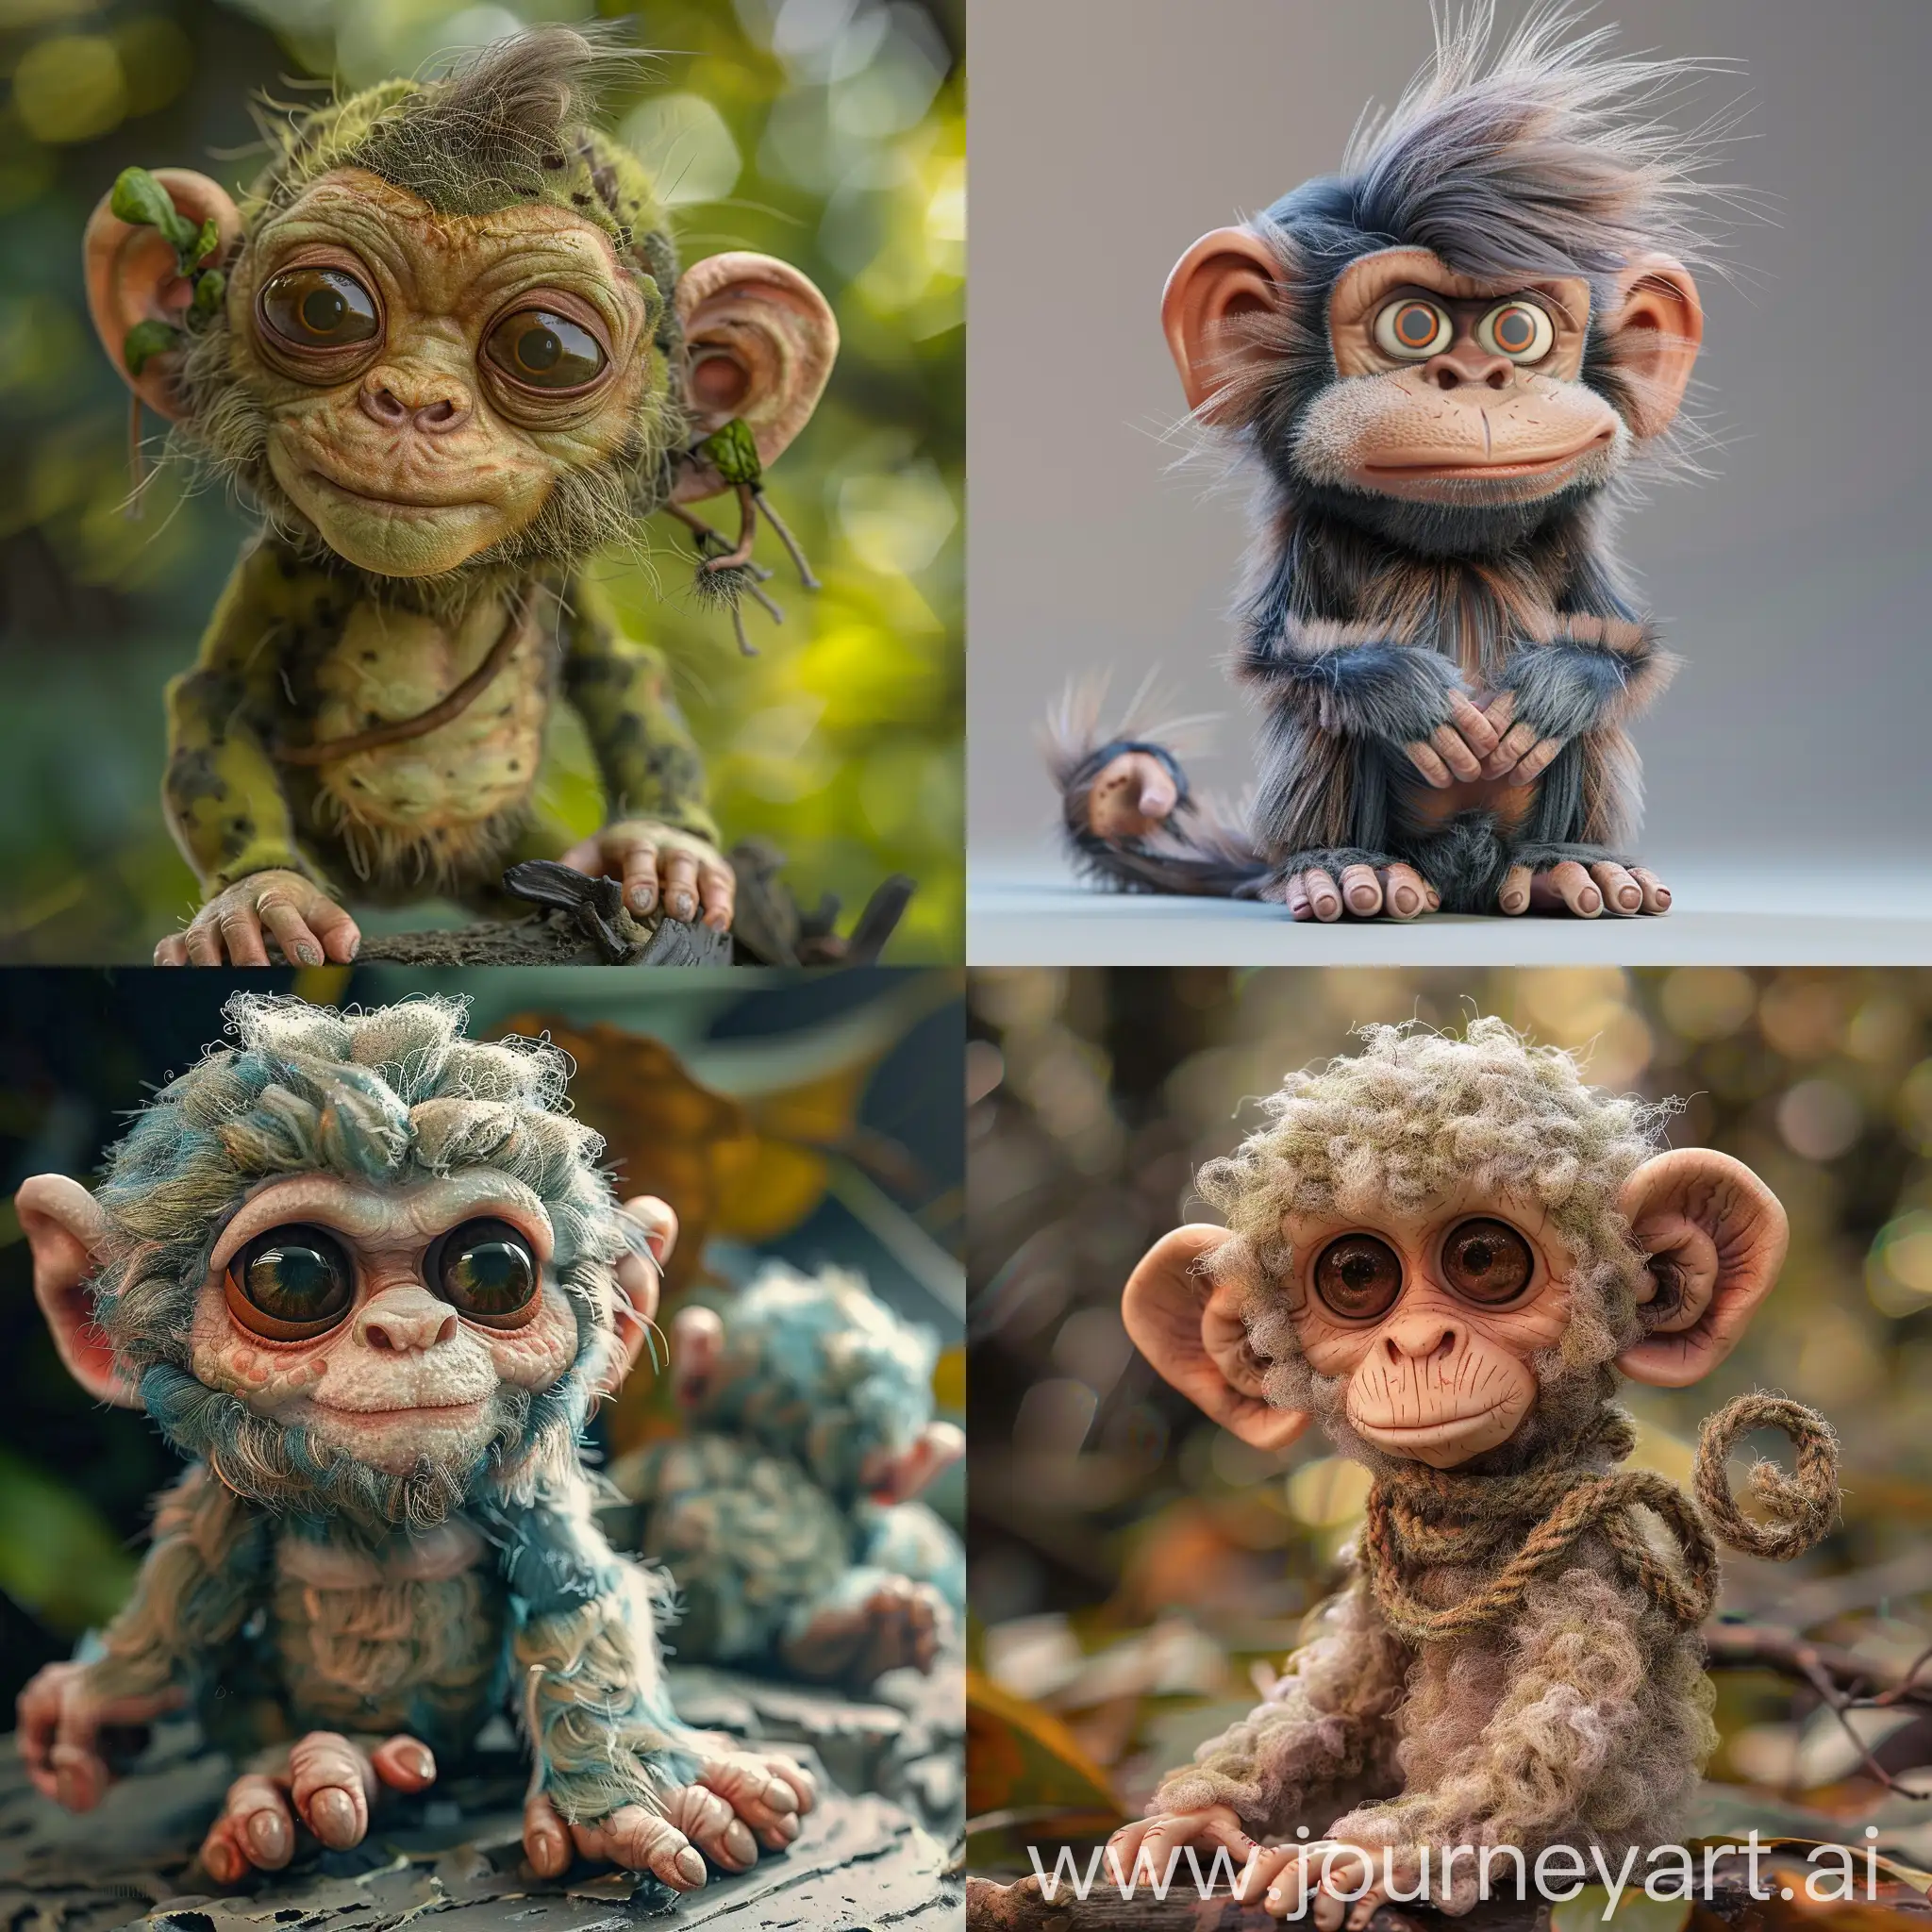 Hybrid of monkey and troll, cute, like in Toy Story, highly detailed,